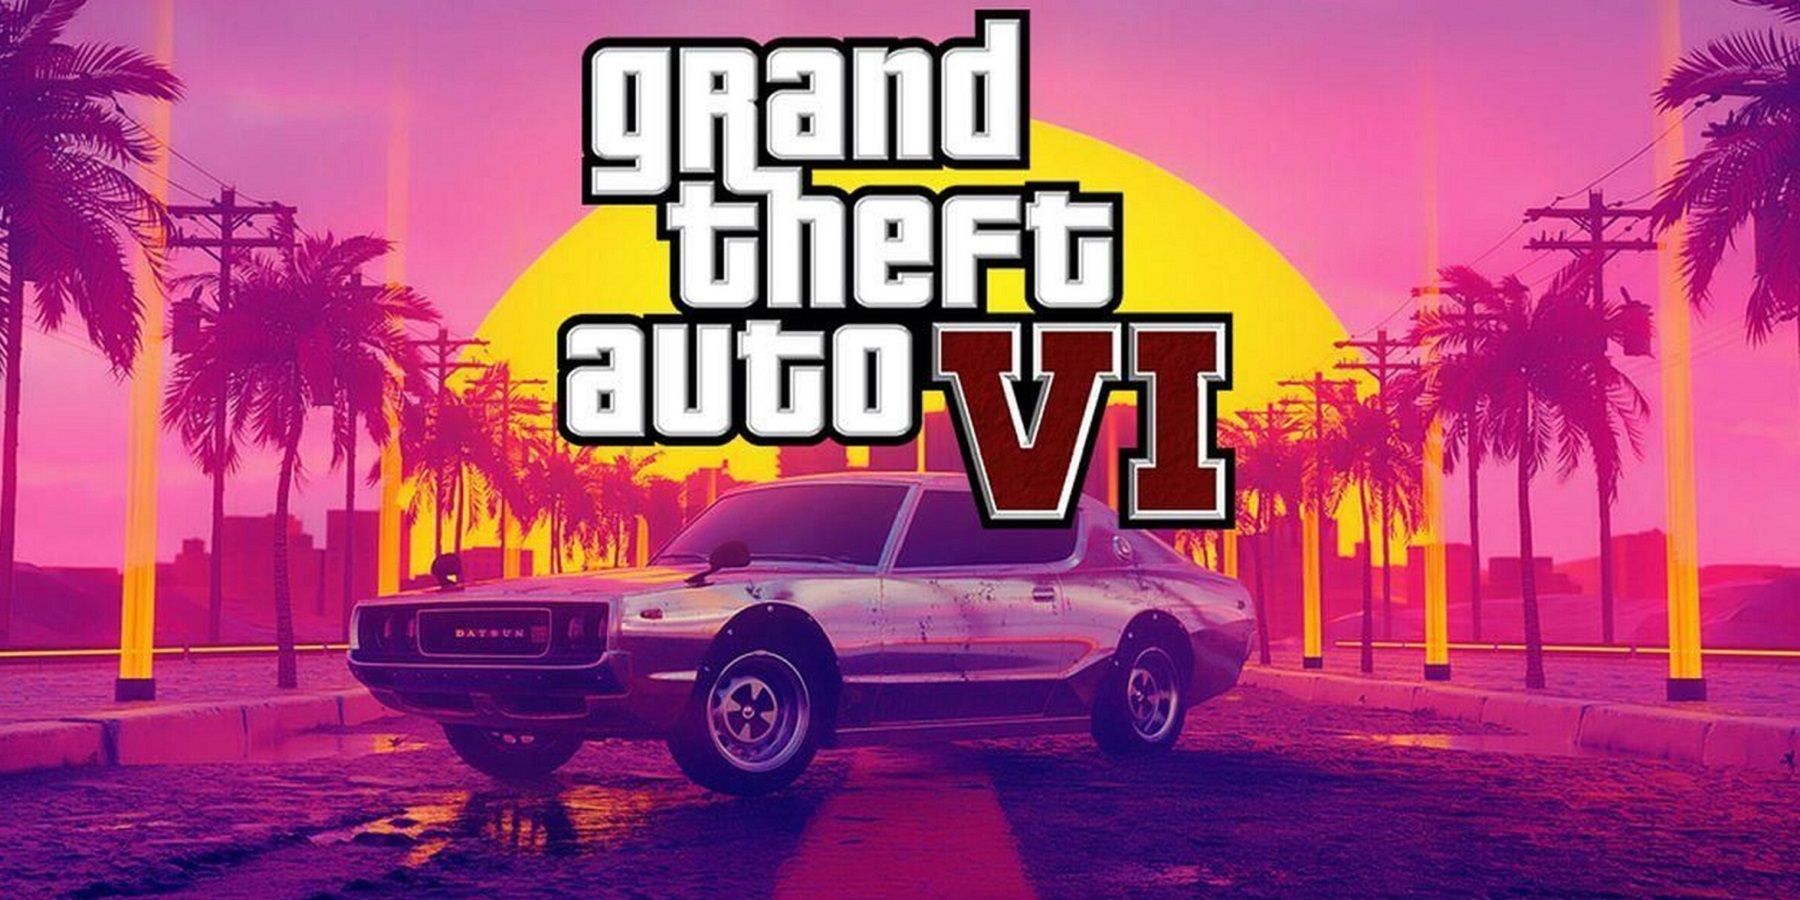 A mock-up image showing a fancy car under a Grand Theft Auto 6 logo.